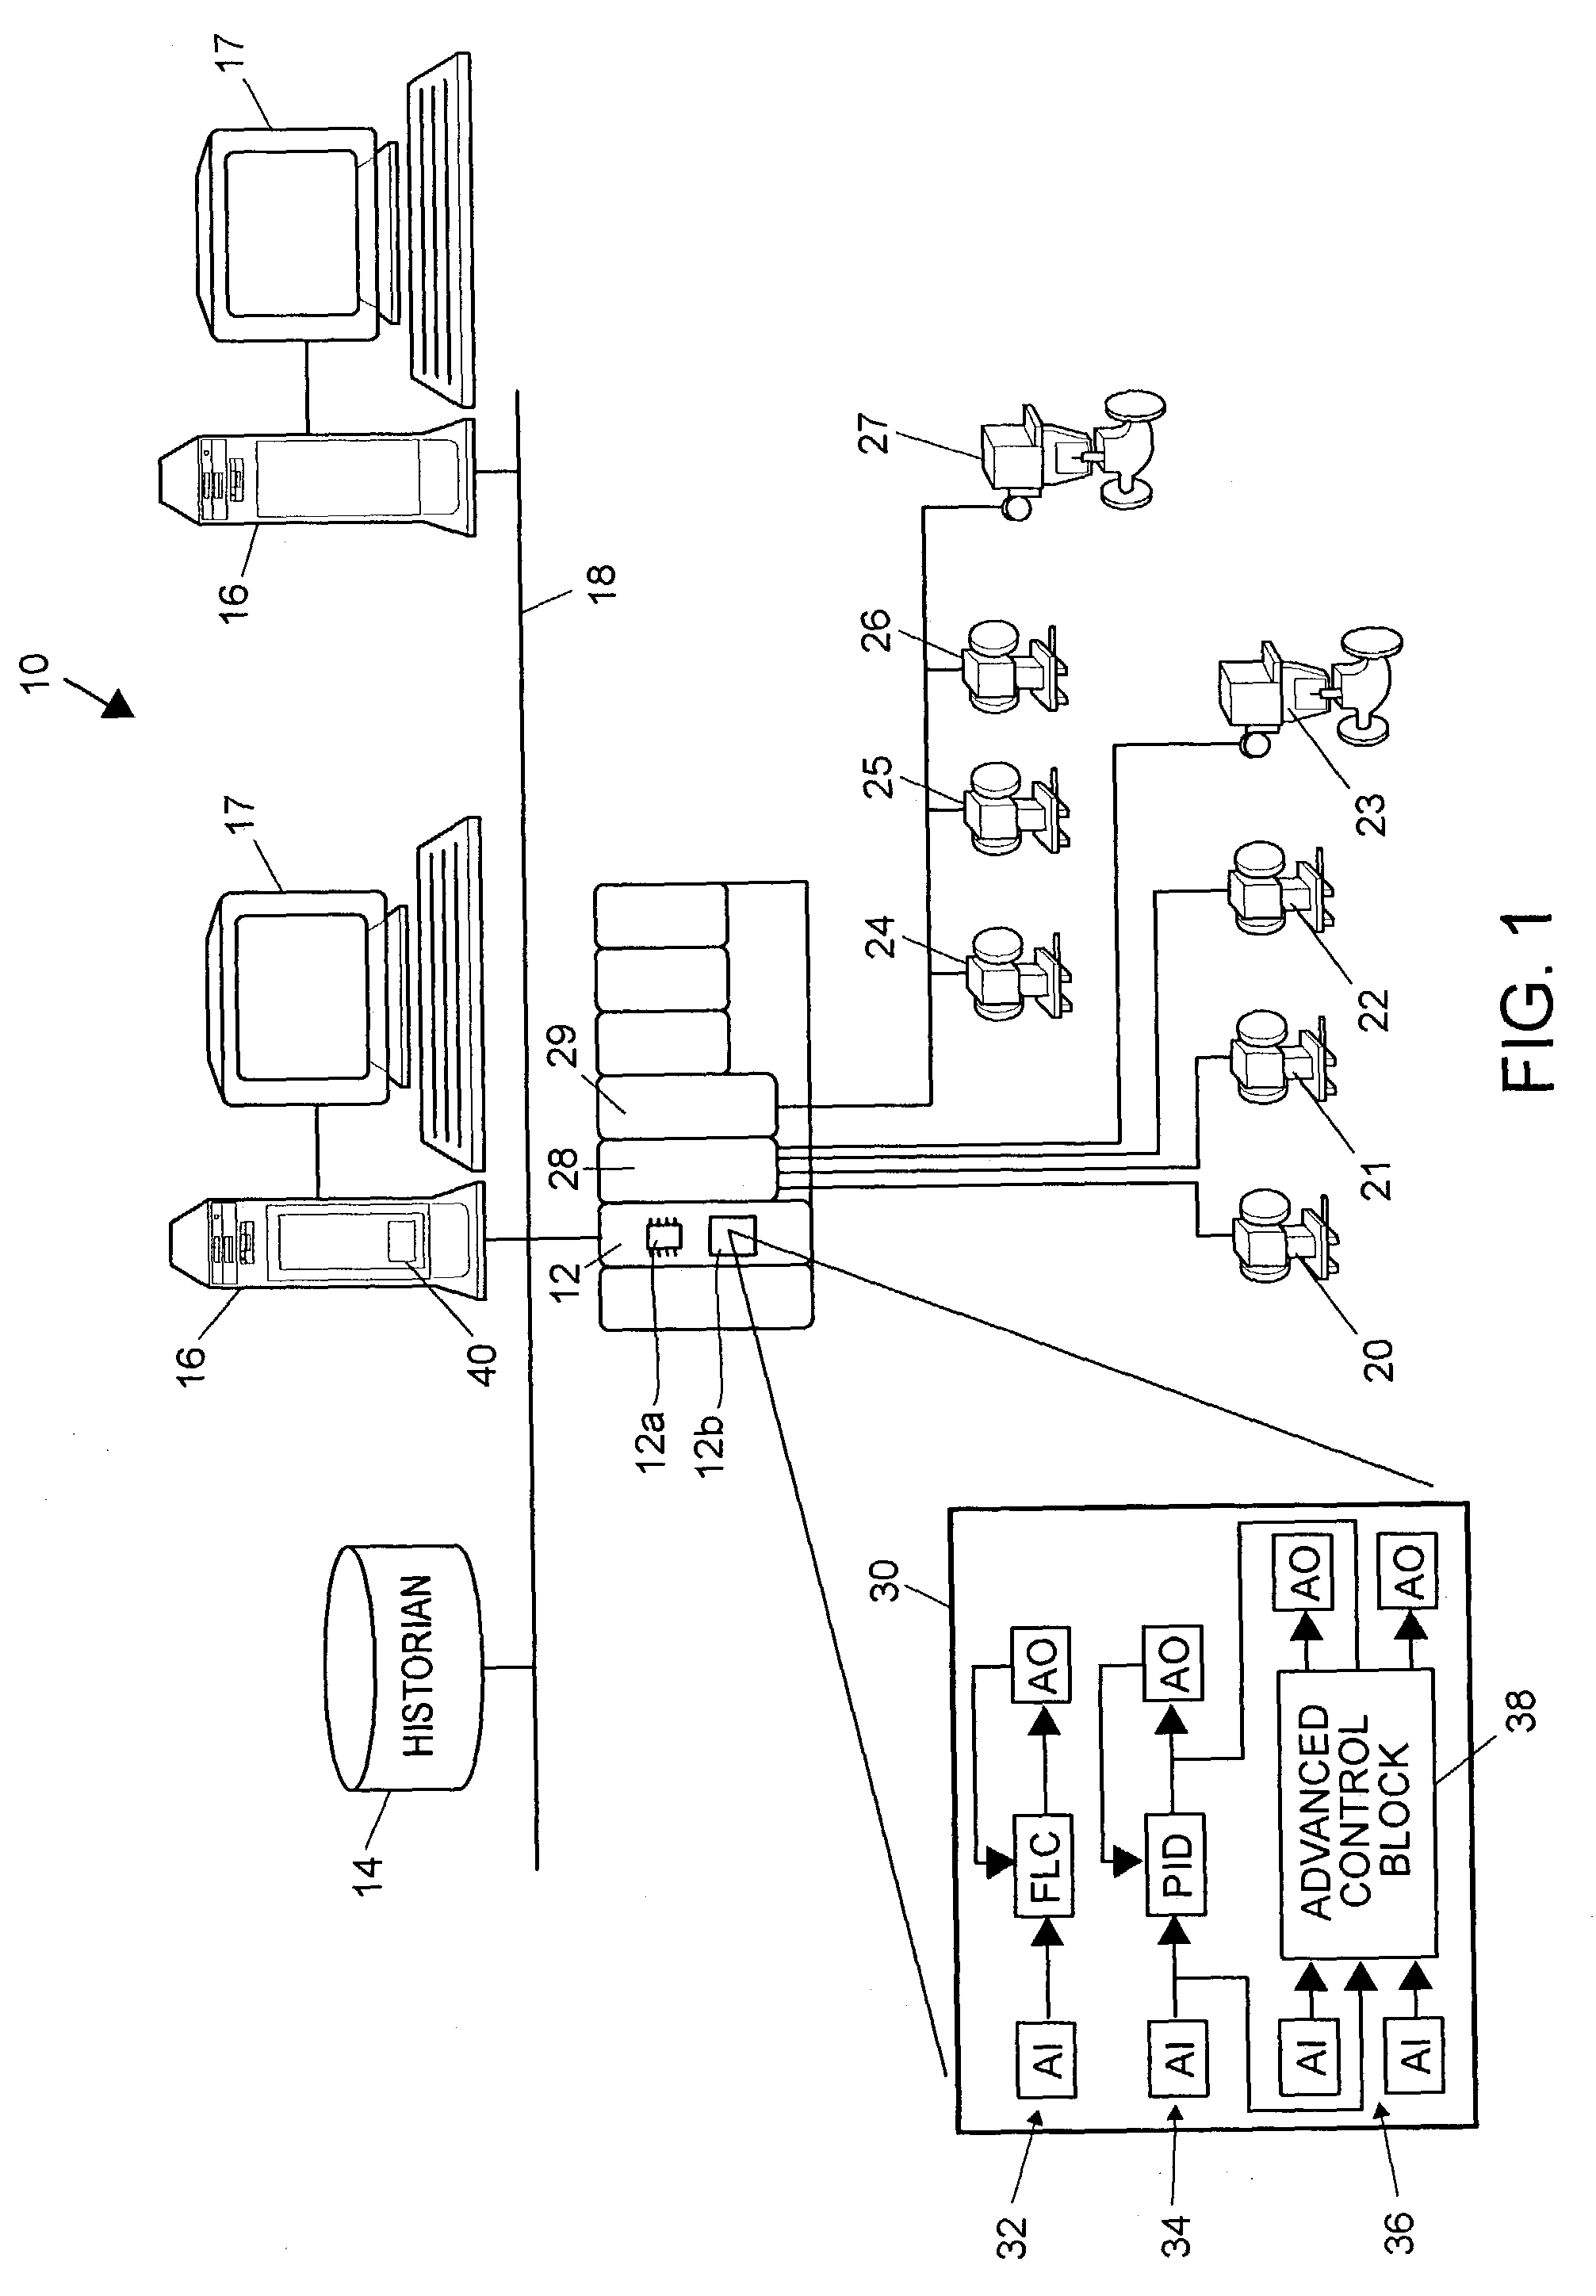 Multiple-input/multiple-output control blocks with non-linear predictive capabilities